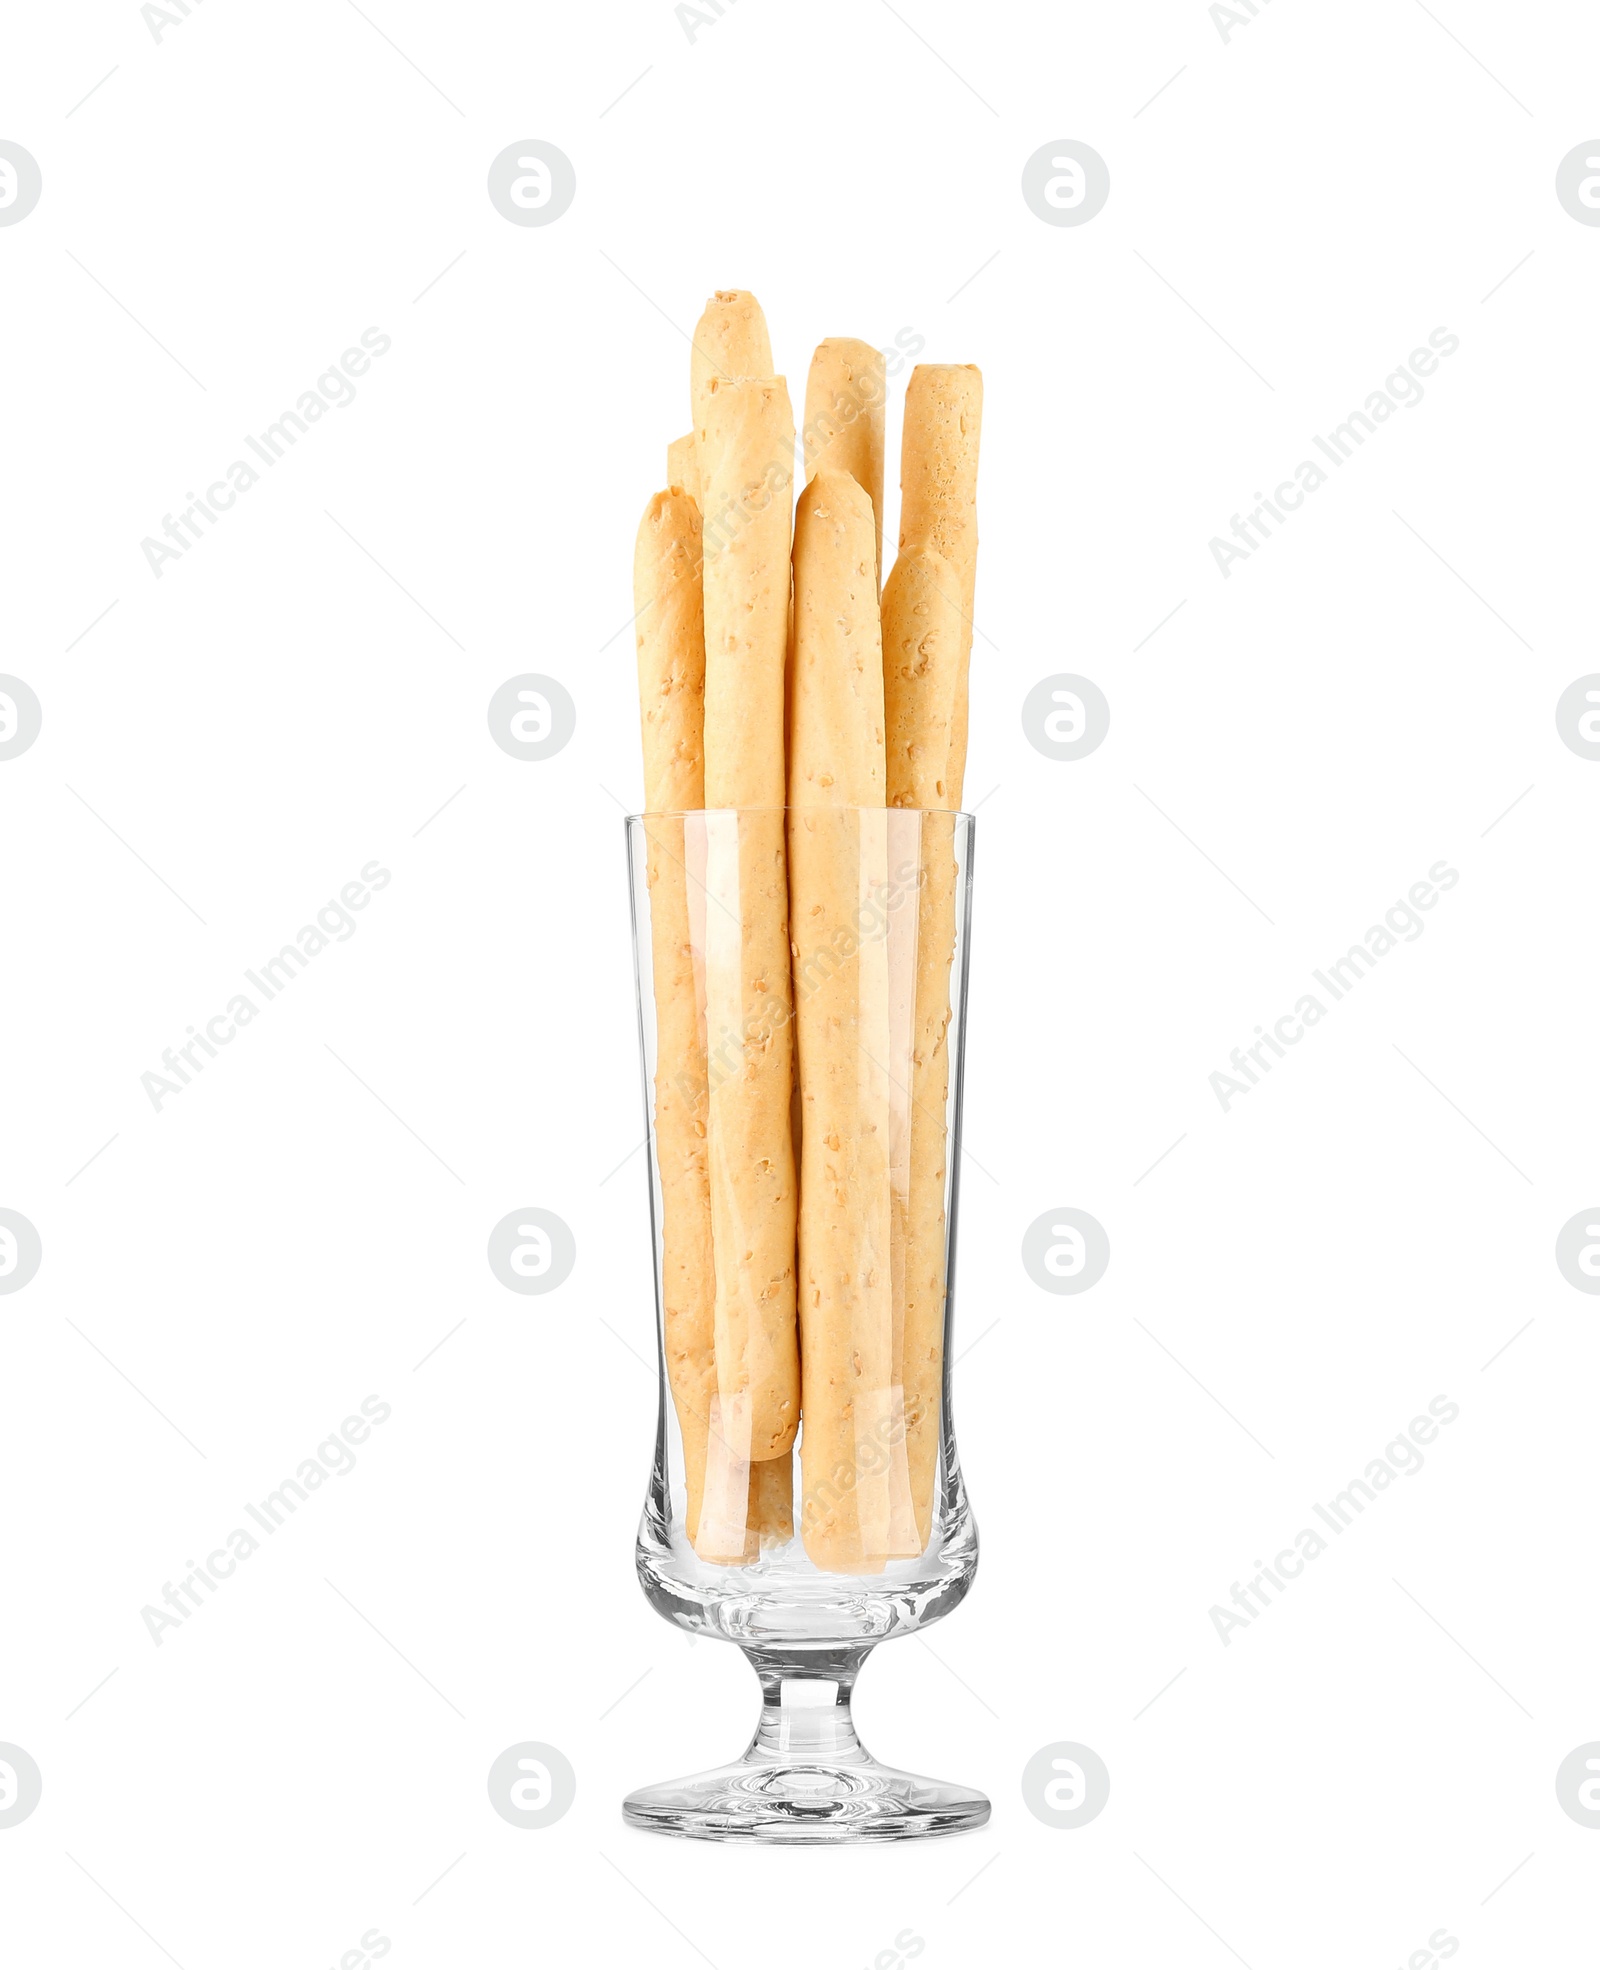 Photo of Delicious grissini in glass on white background